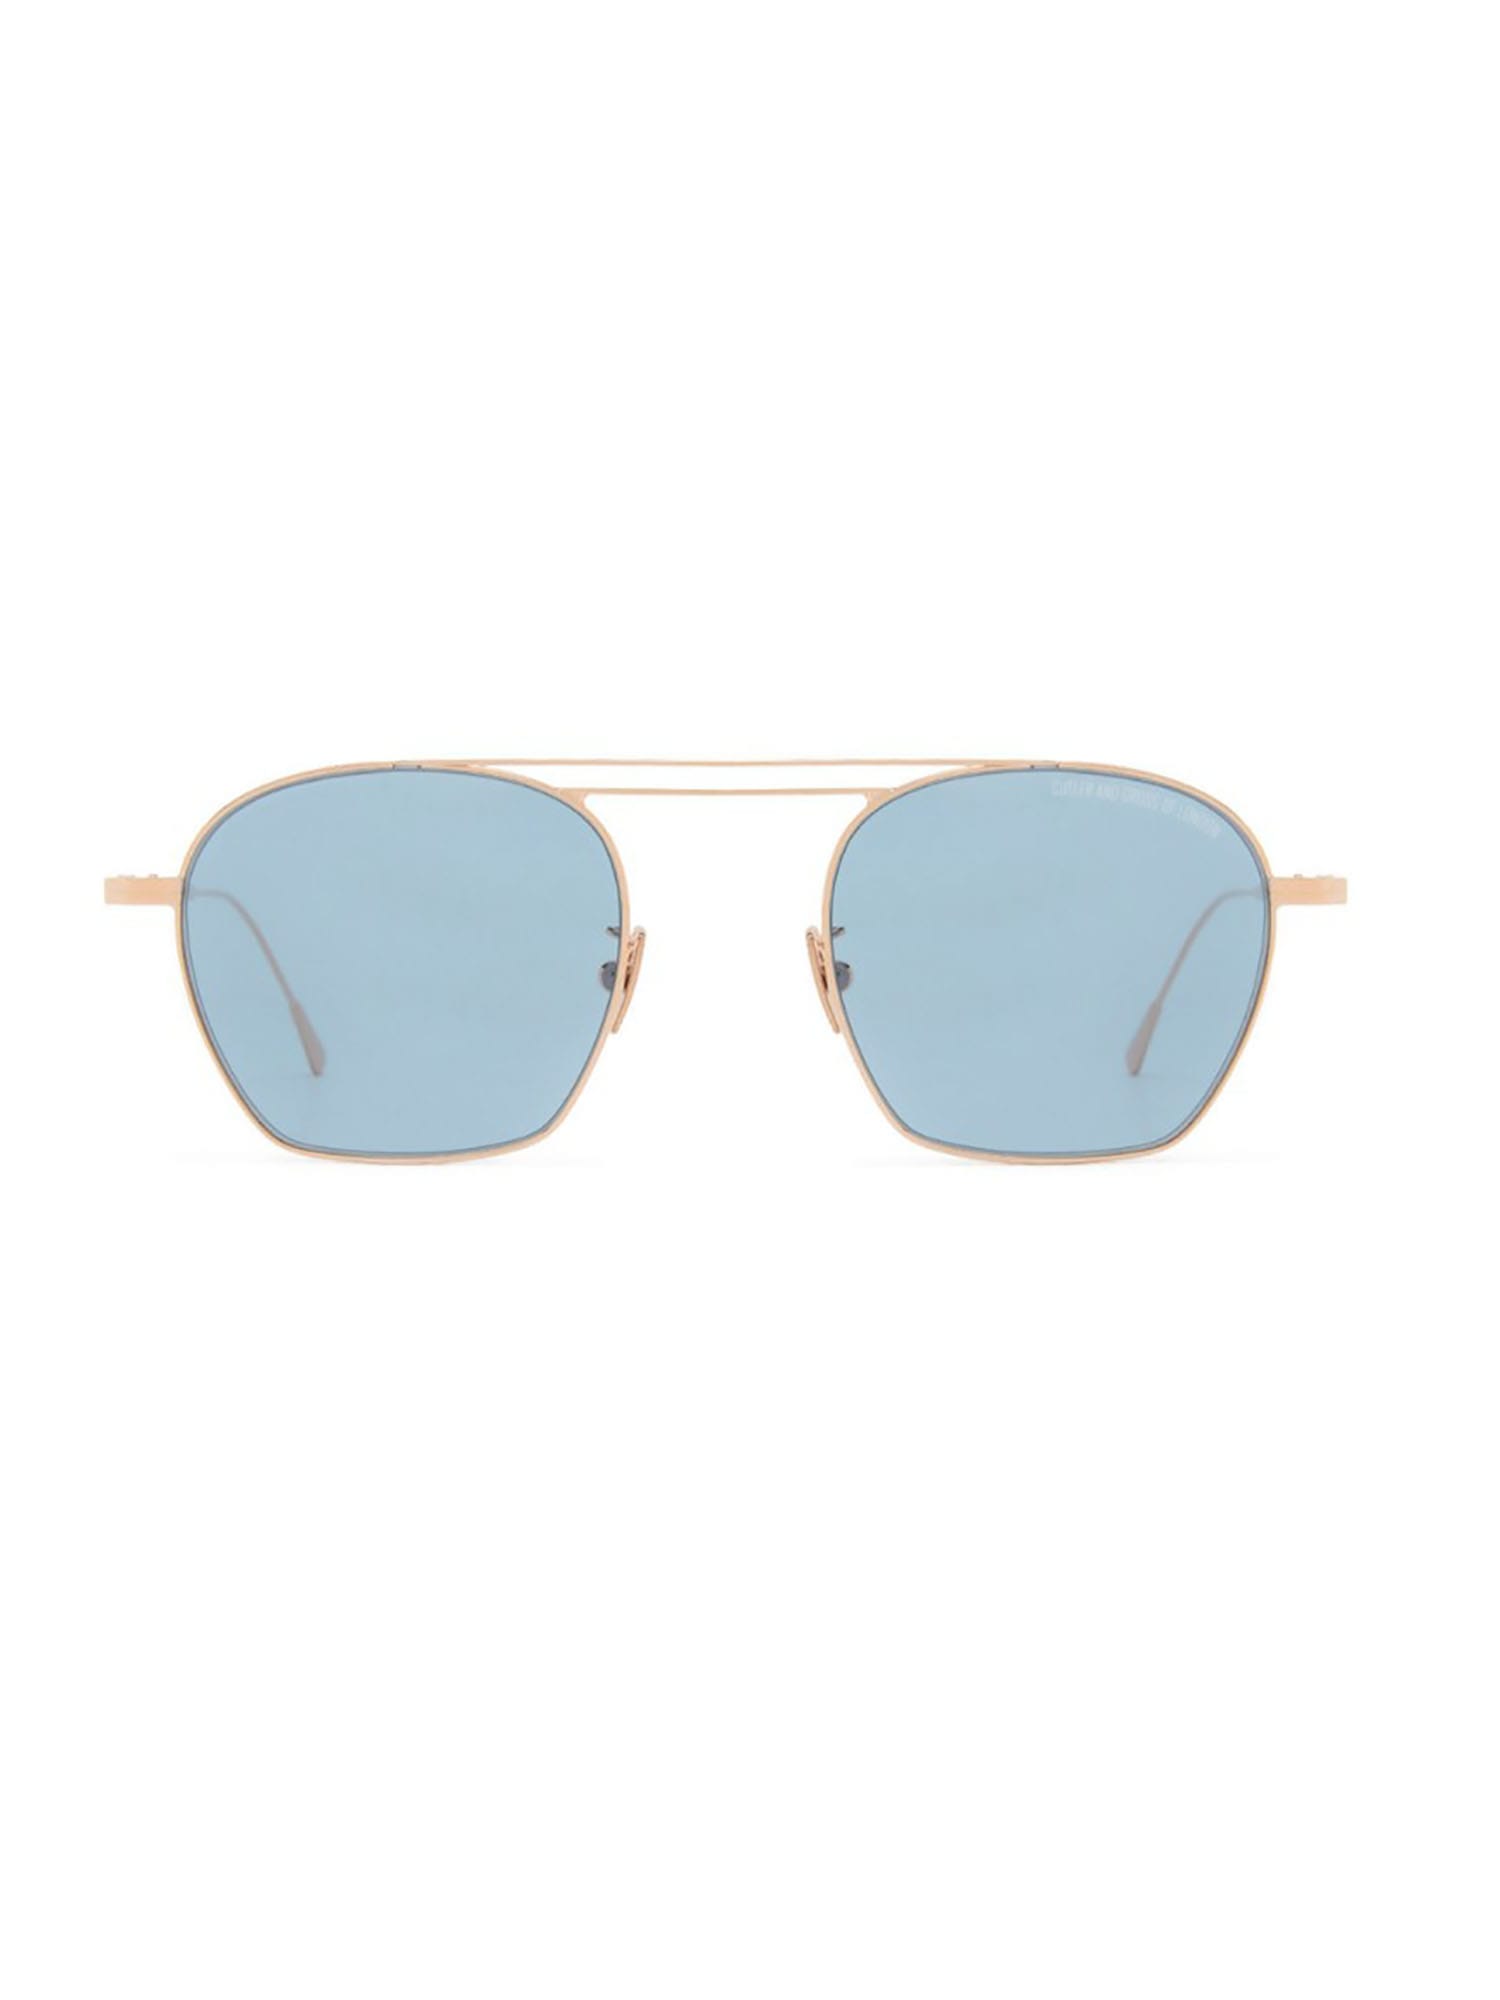 Cutler And Gross 0004 Sunglasses In Rose Gold